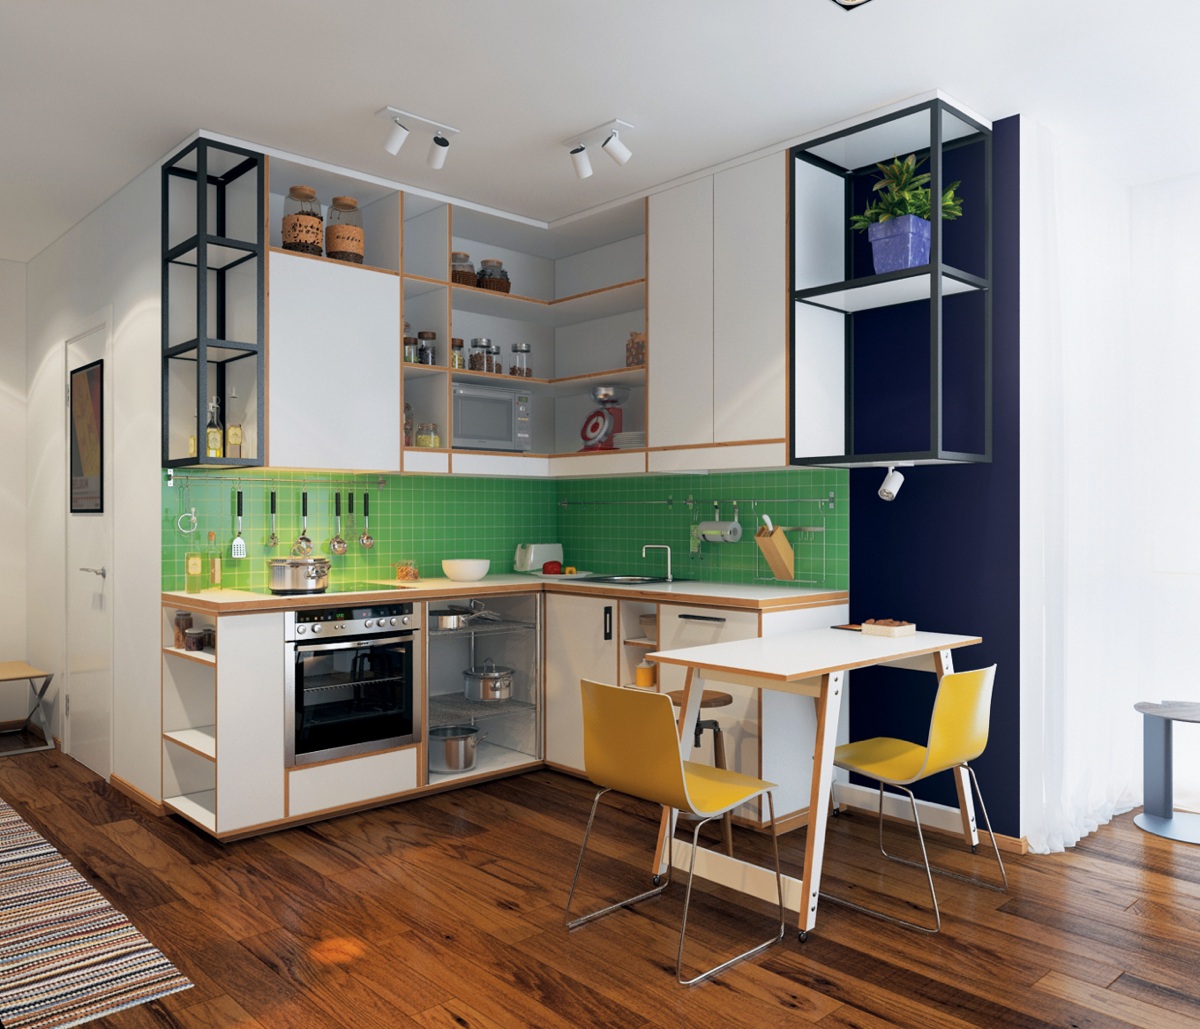 Homes Under 400 Square Feet: 5 Apartments That Squeeze Utility Out Of Every Square Inch